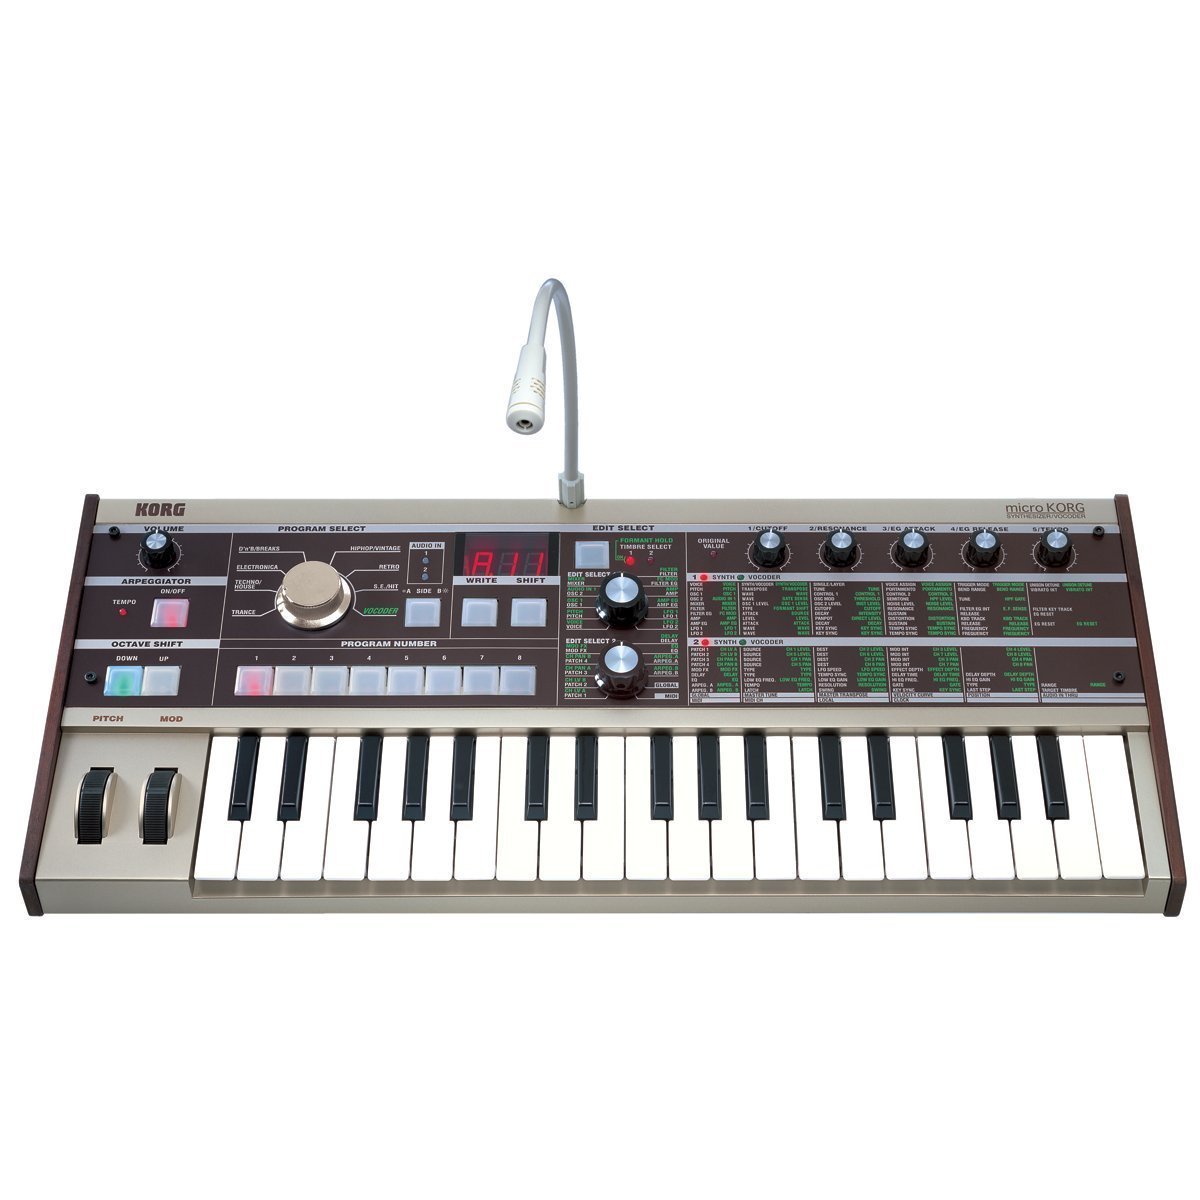 The Top 5 Synthesizer Keyboards